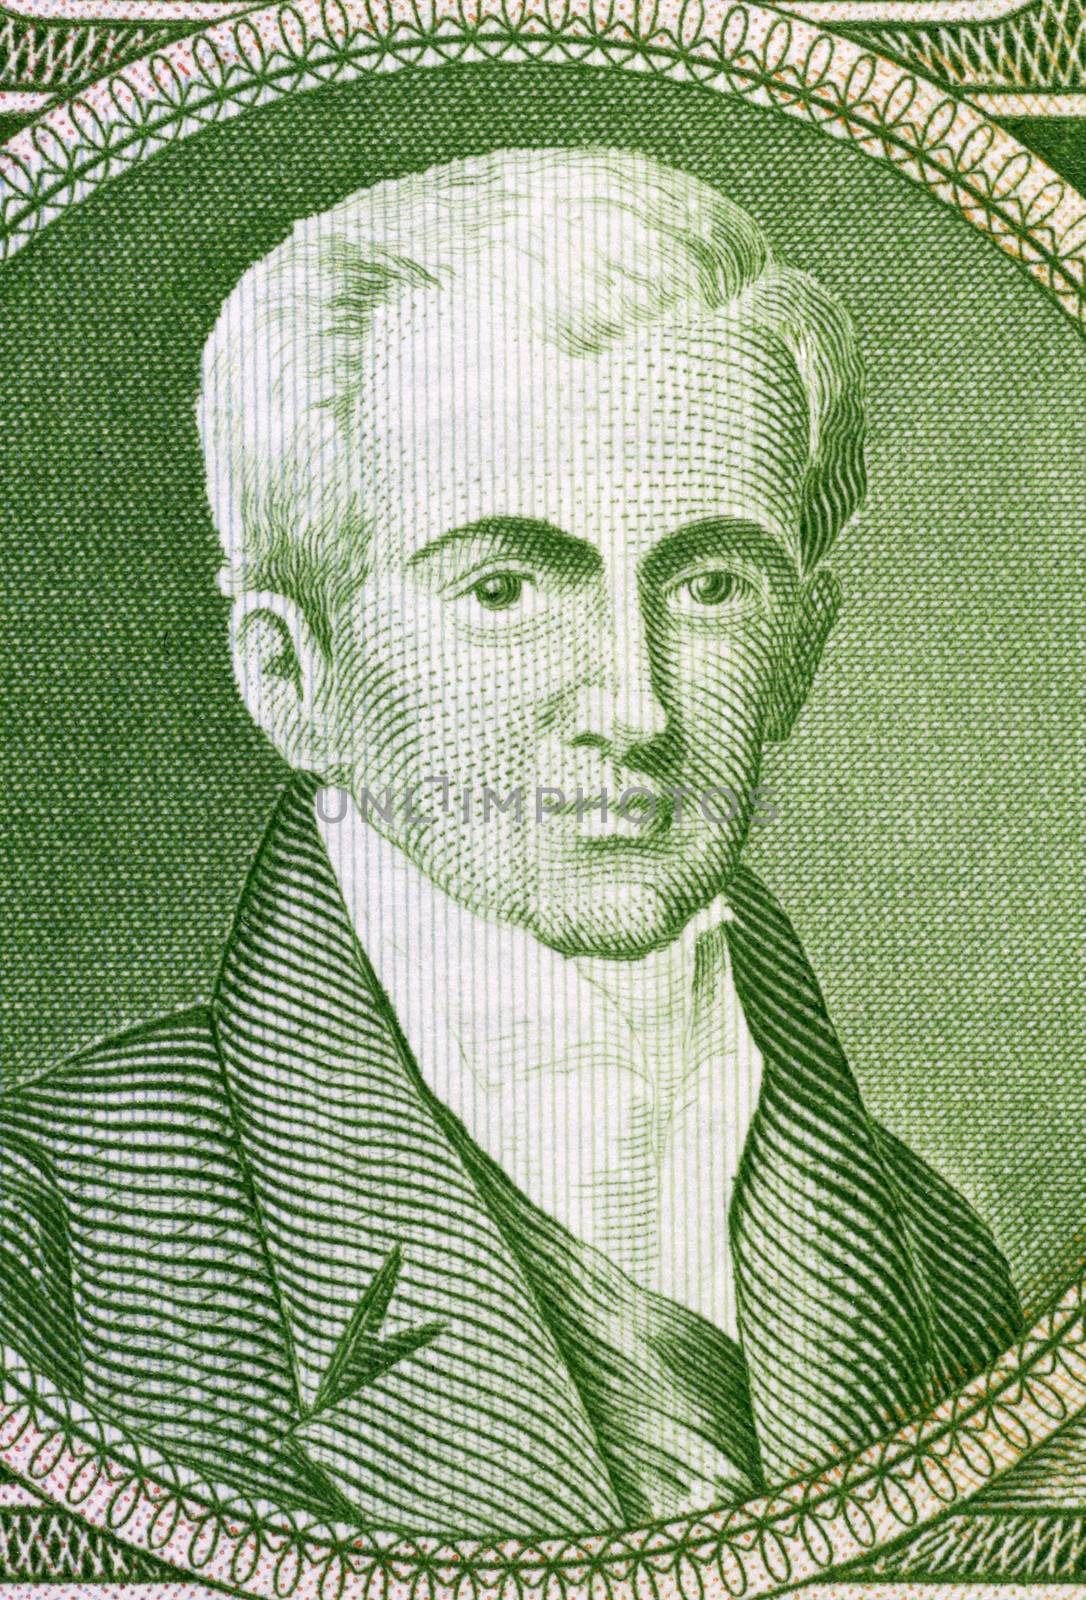 Ioannis Kapodistrias on 500 Drachmai 1945 Banknote from Greece.First head of state of independent Greece after the revolution against the Ottoman Empire.